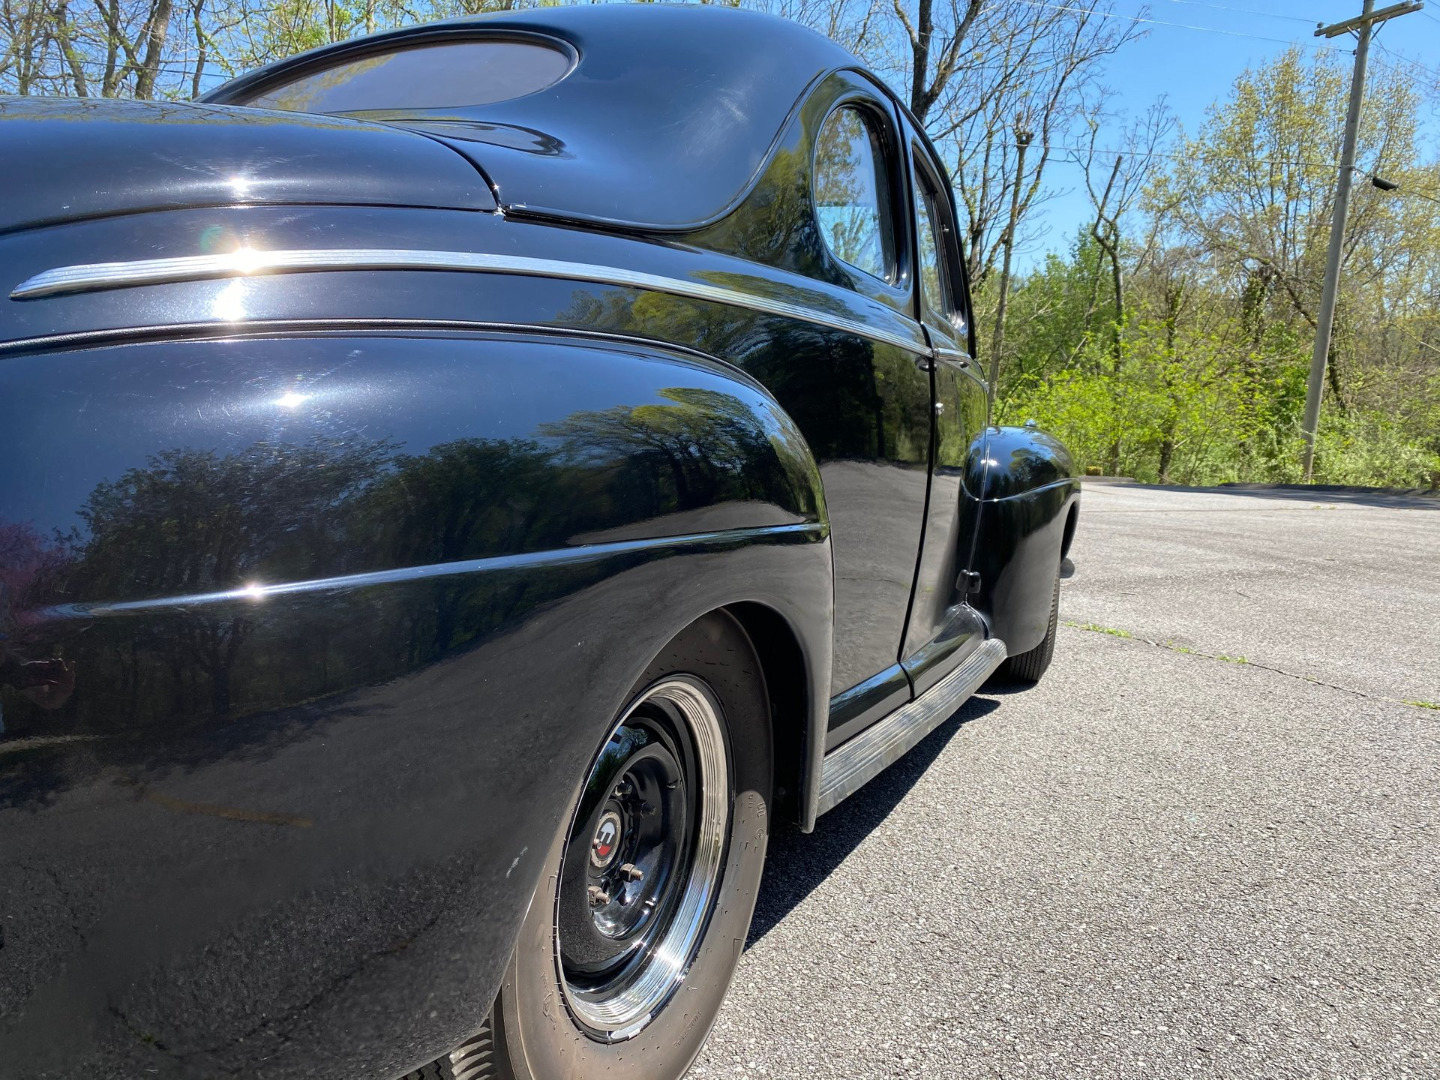 car-20457-1941-ford-business-coupe38.jpeg